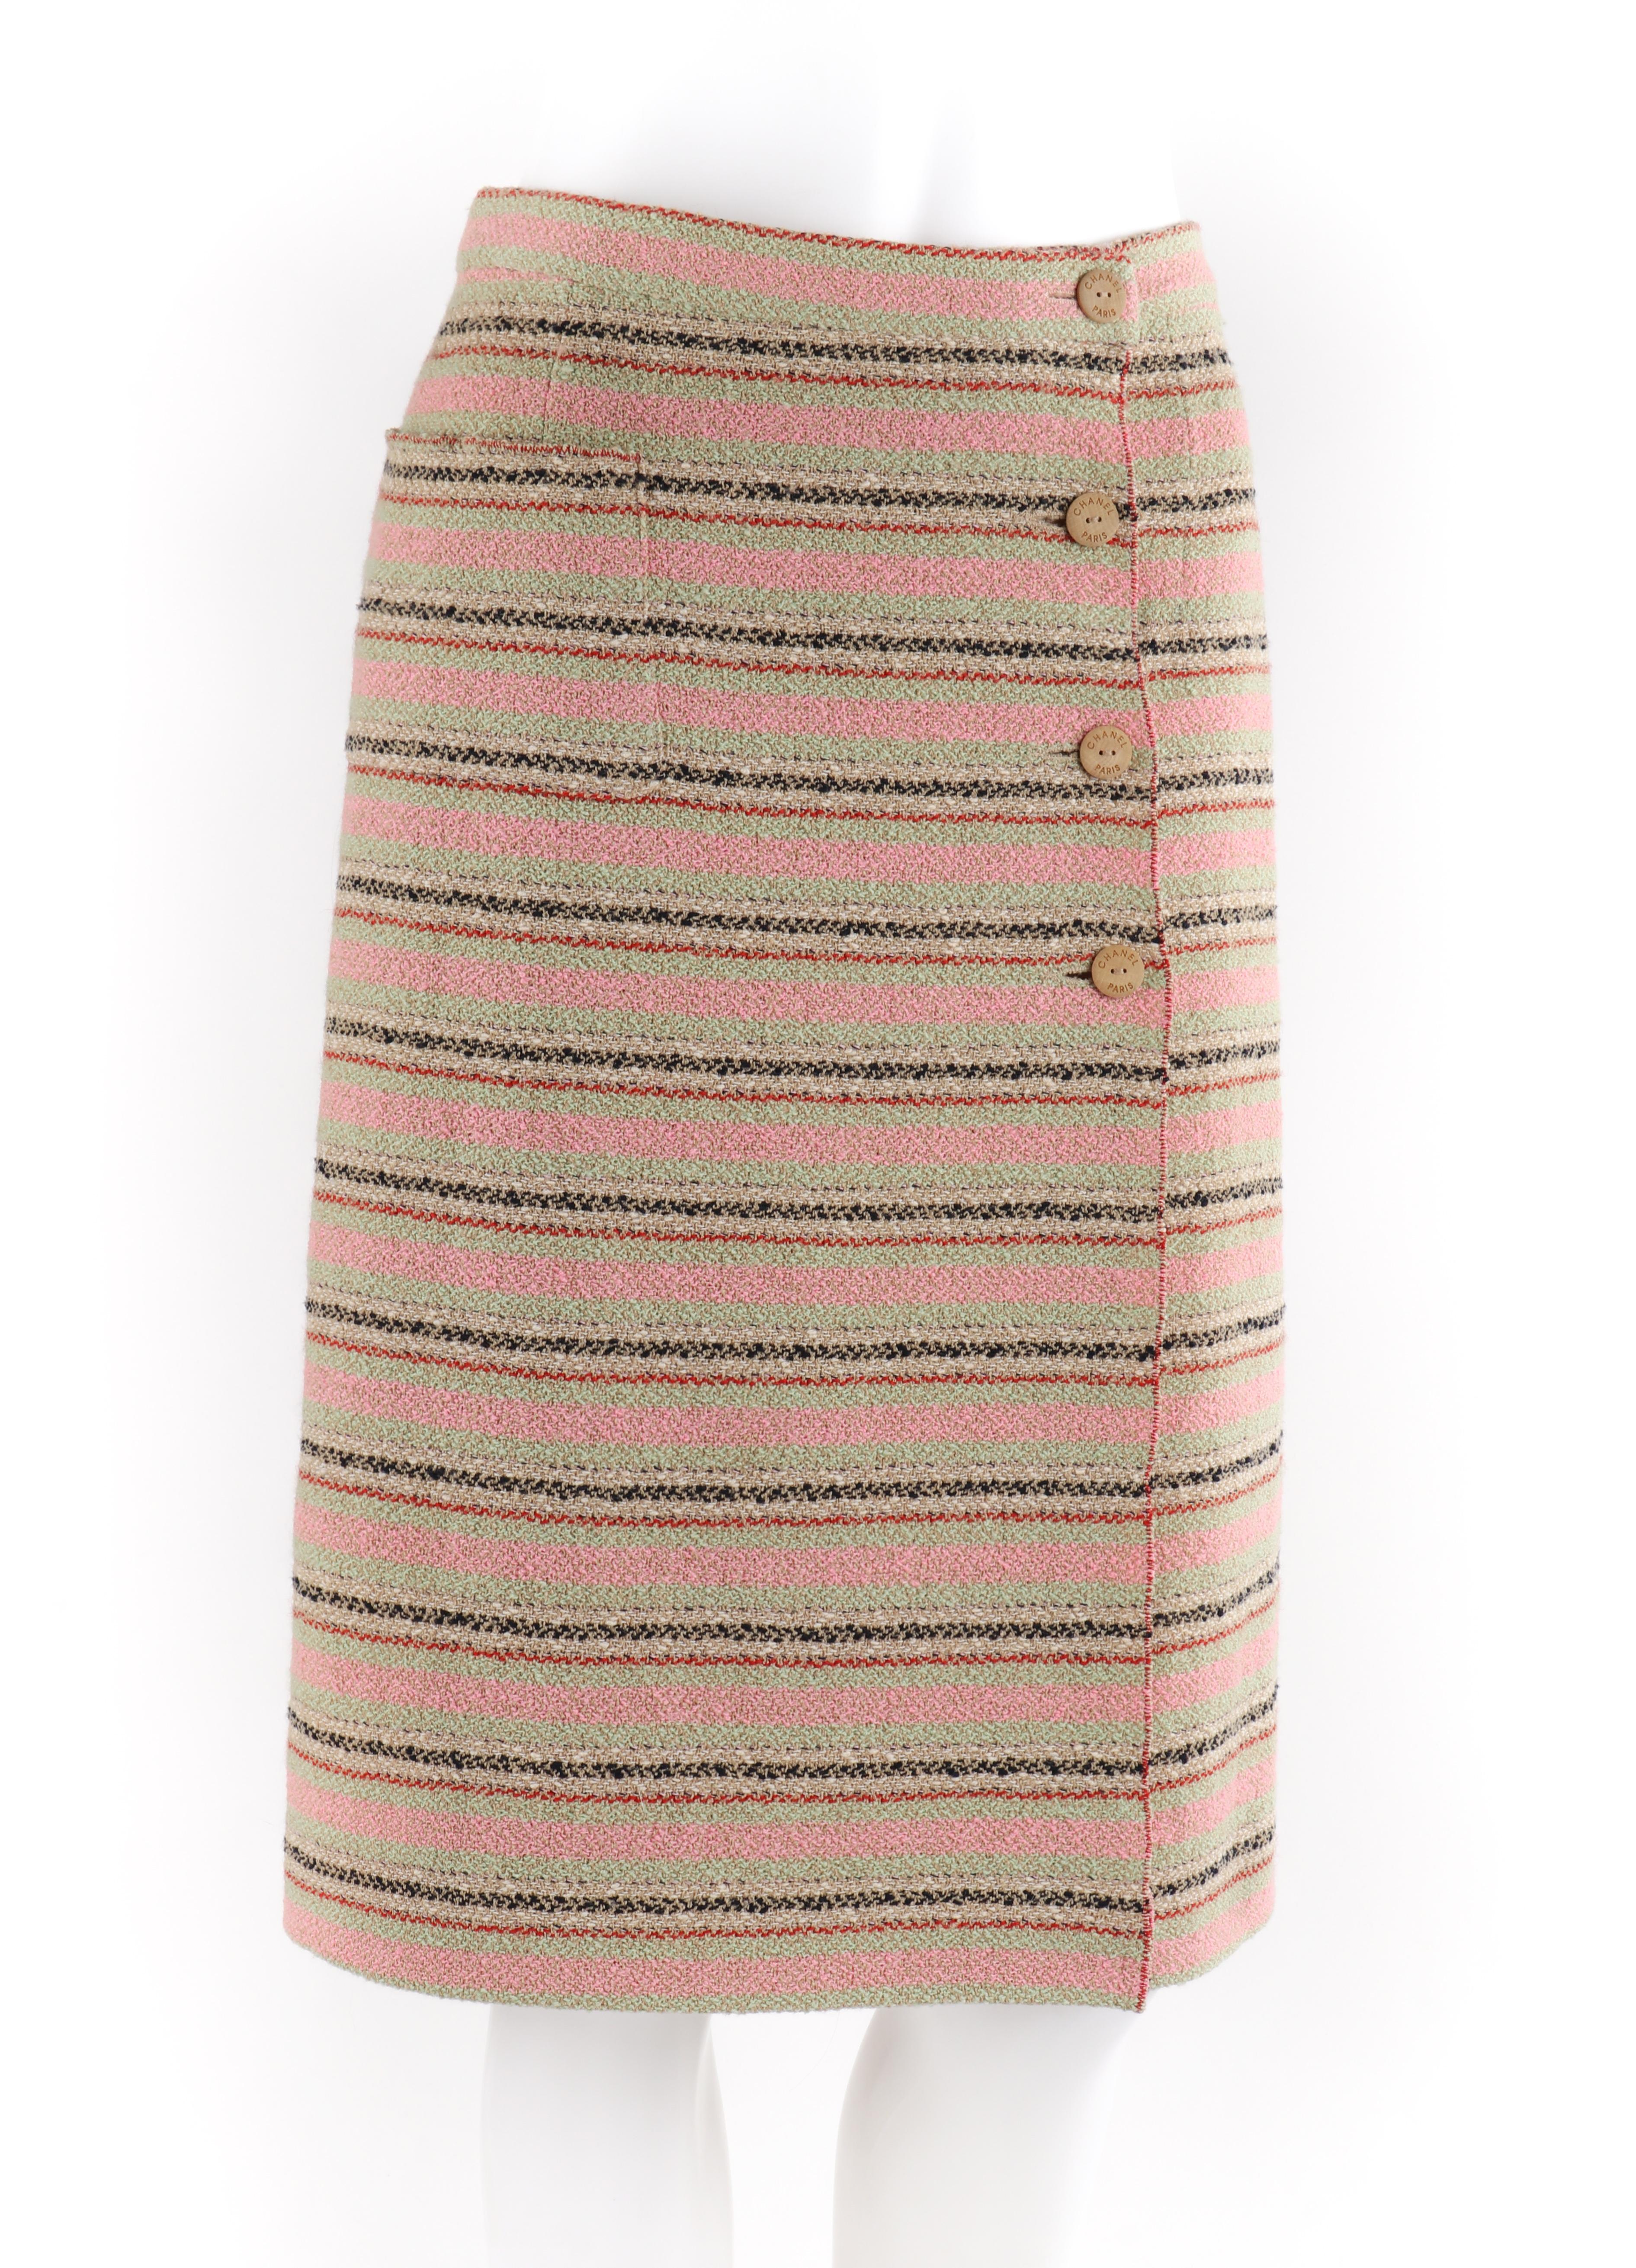 CHANEL Cruise Collection 2000 Multi-Color (Pink Green Brown) Stripe Wrap Button Up Skirt 
 
Brand / Manufacturer: Chanel 
Collection: Cruise Collection 2000
Designer: Karl Lagerfeld
Style: Wrap skirt 
Color(s): Shades of pink, brown, red, green and